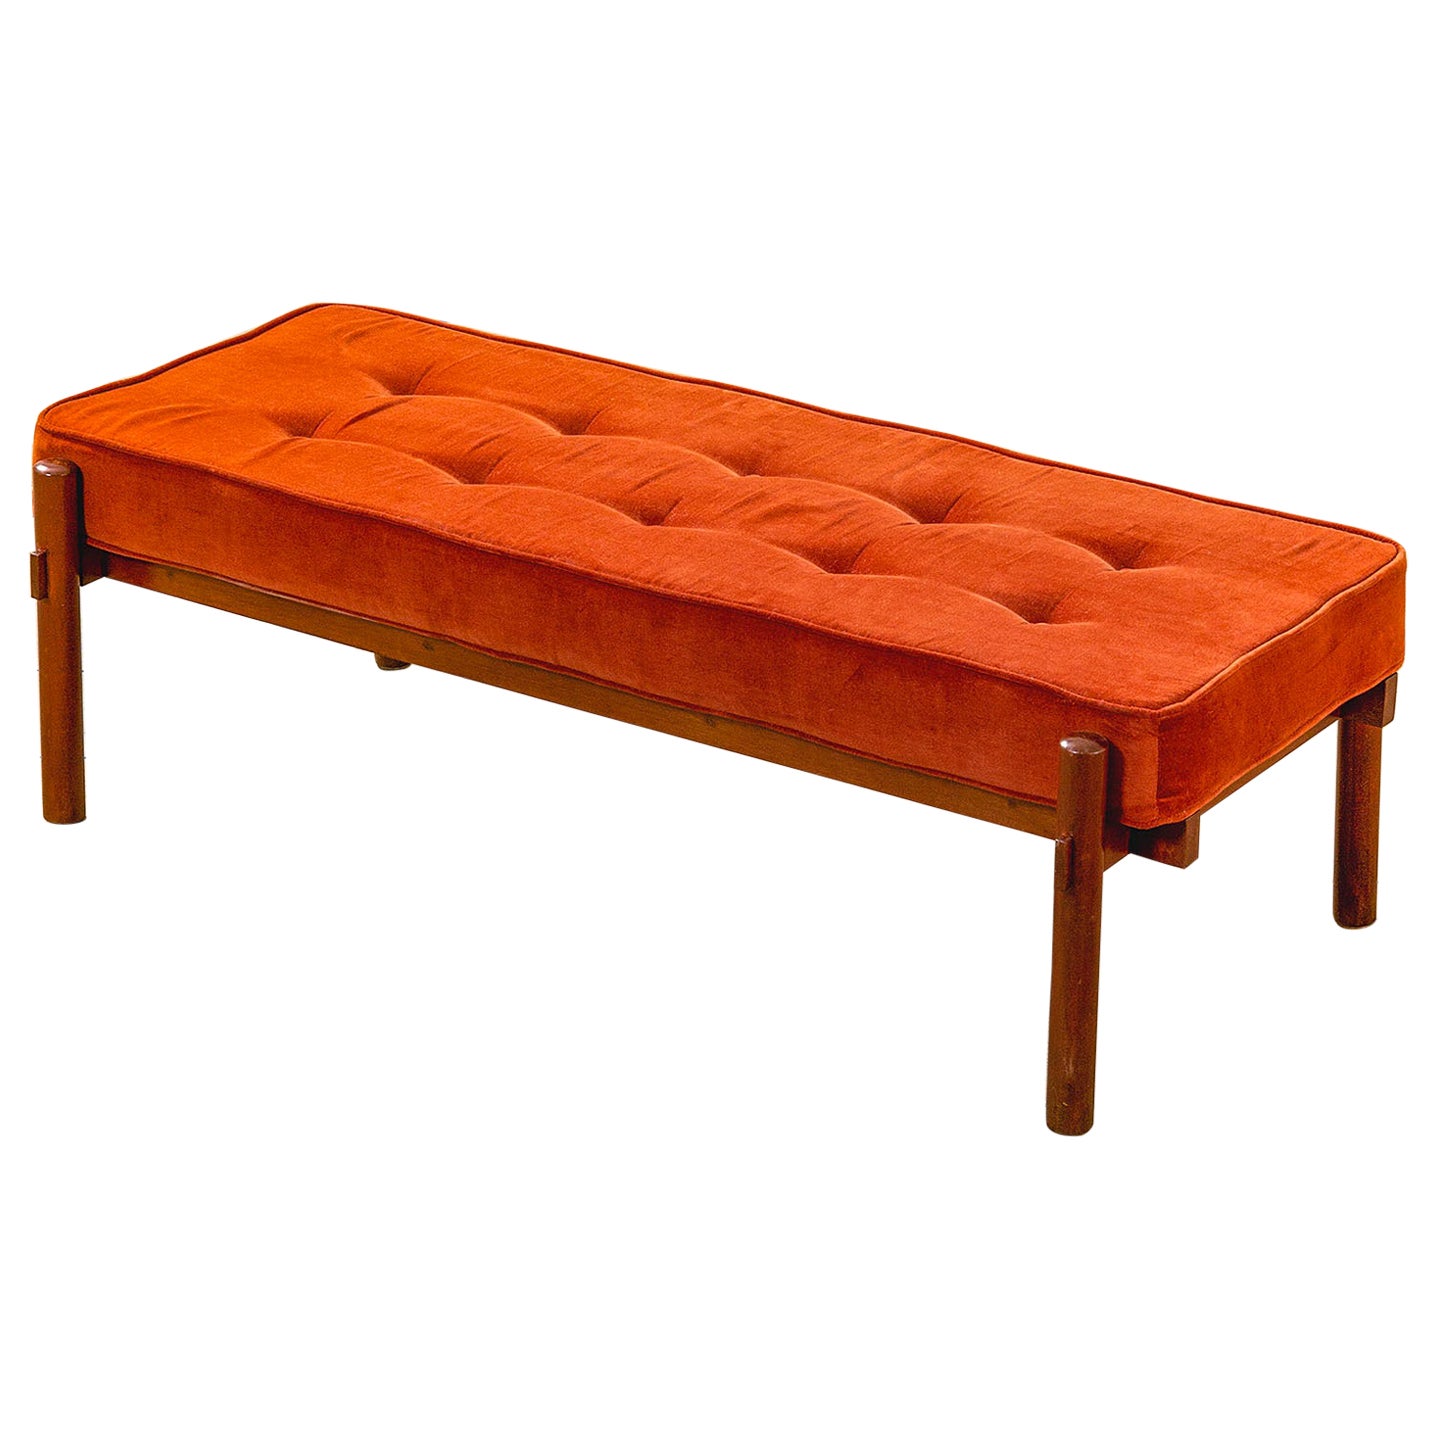 20th Century Ico Parisi Bench with Wooden Structure and Fabric Seating, Red 60s For Sale